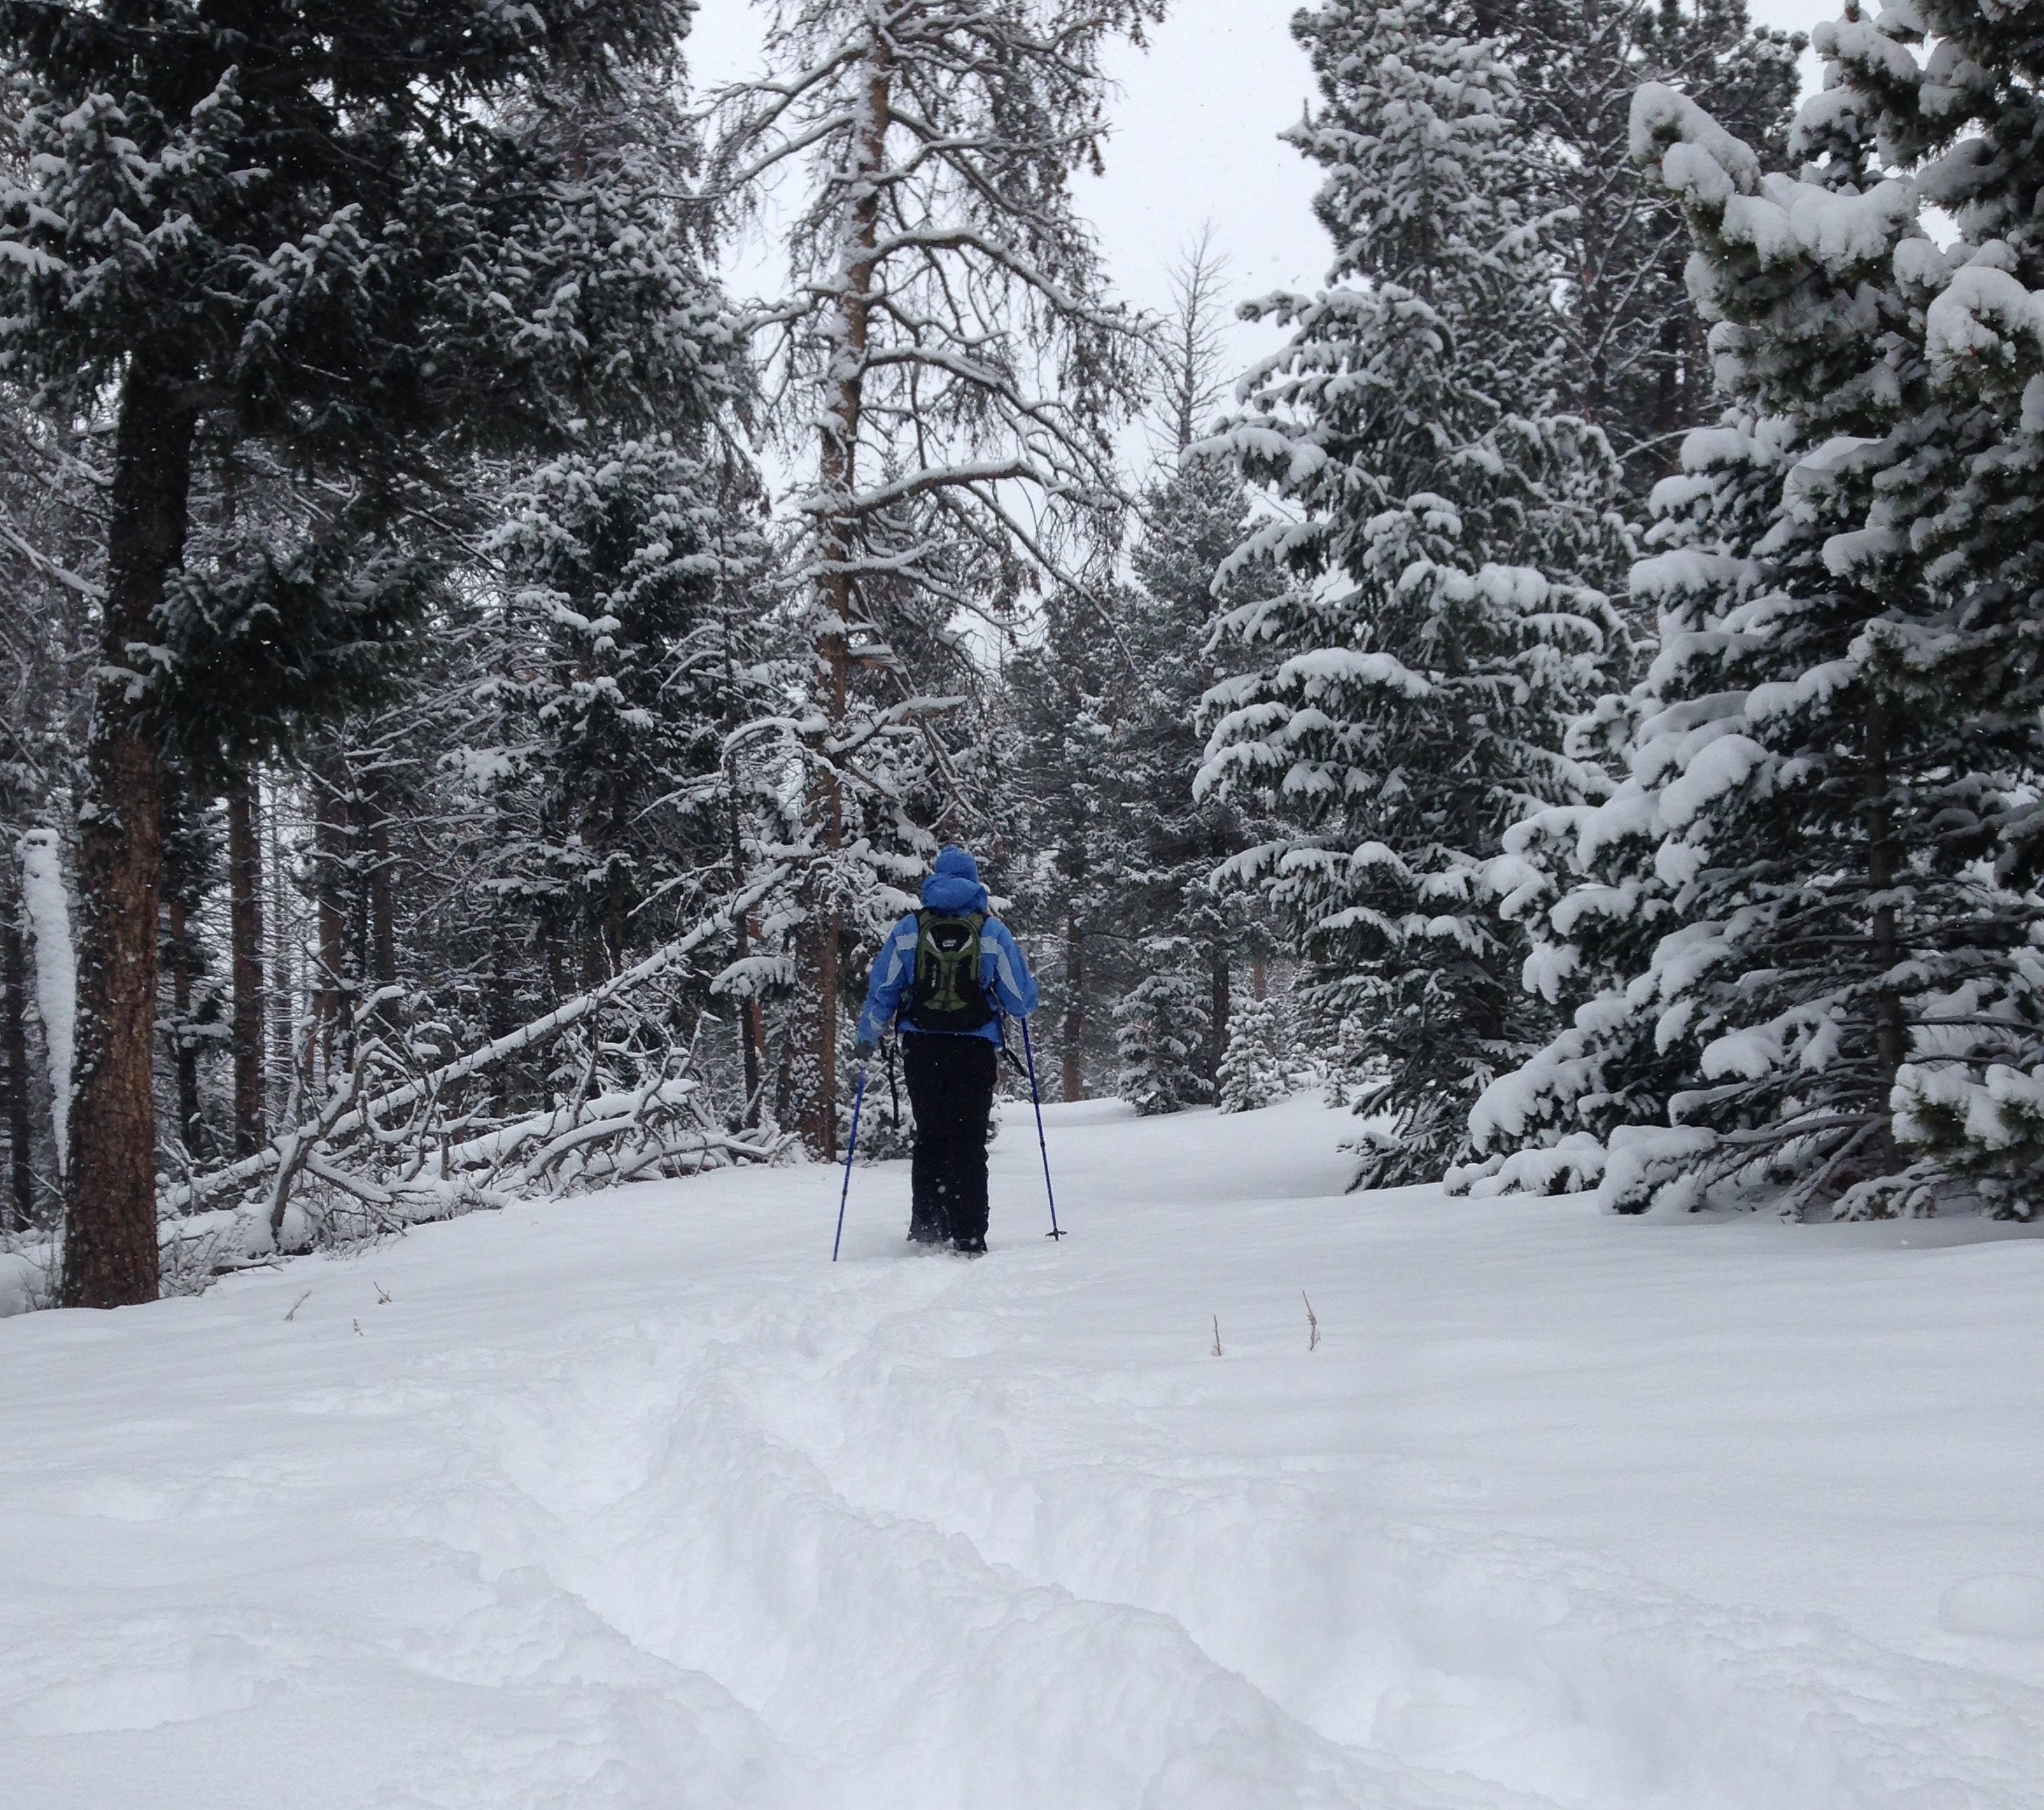 There Is No Better Way to Begin Snowshoeing Than Just Going Out and Doing It!